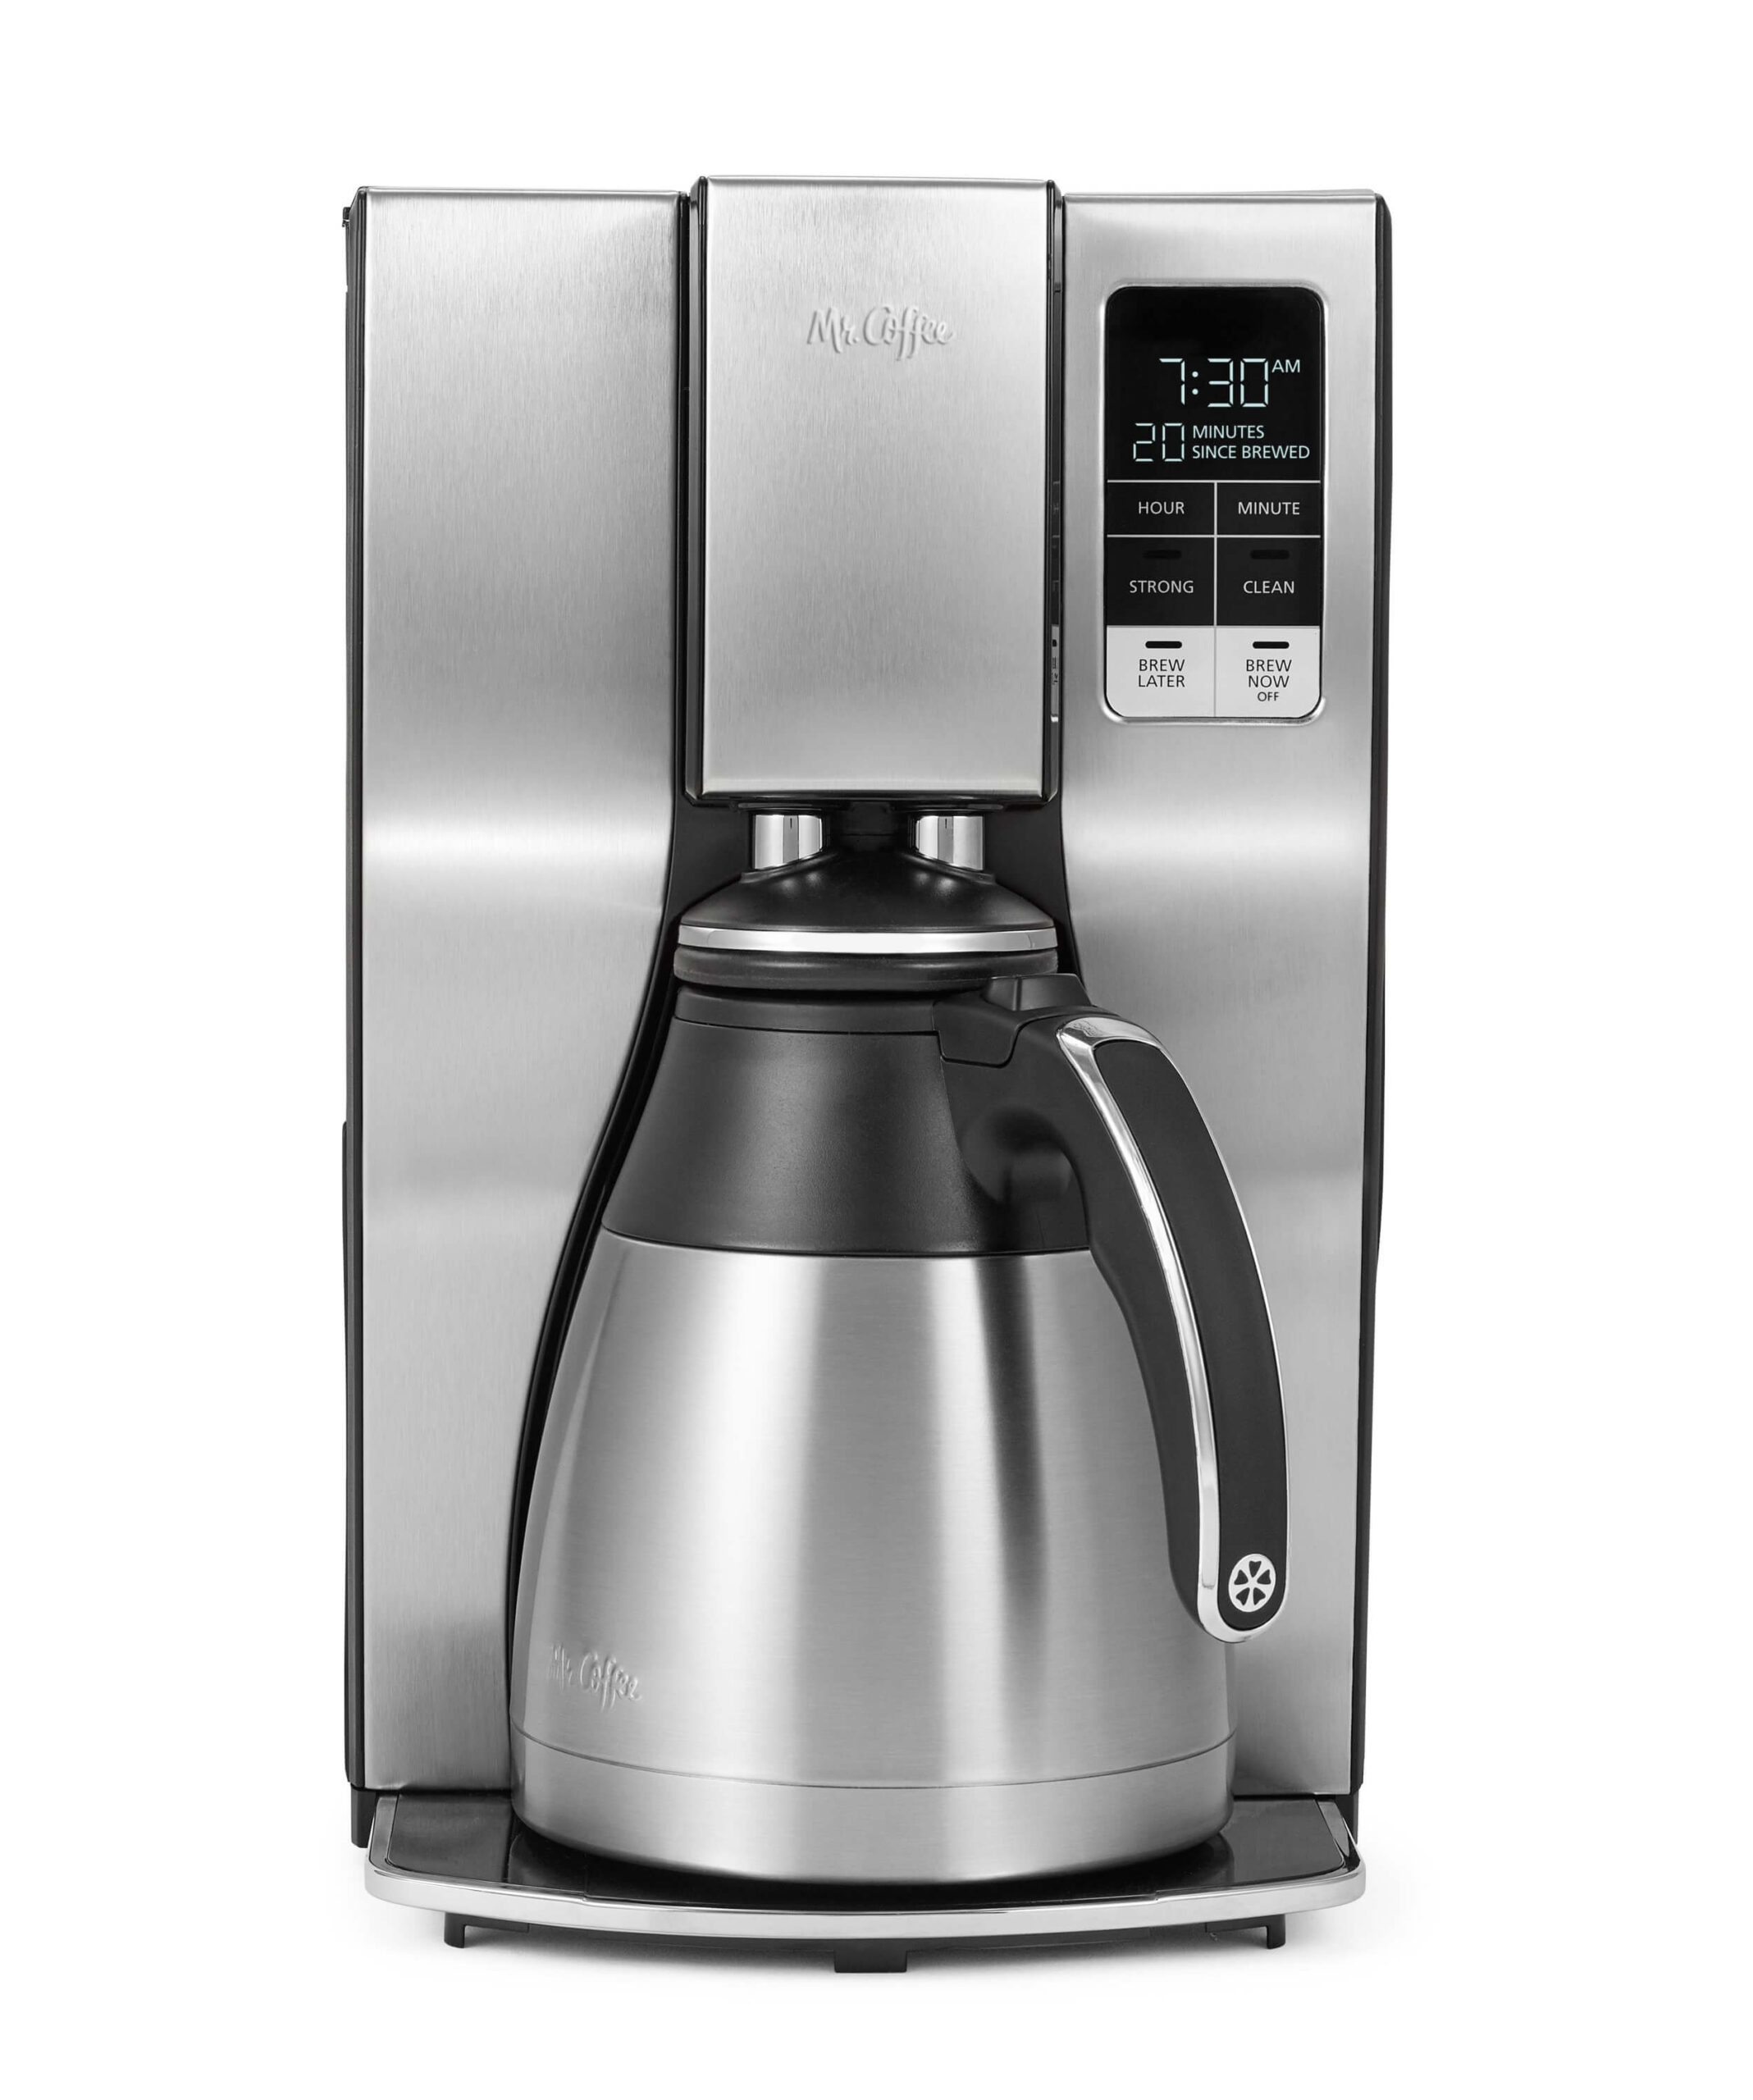 Mr. Coffee 10-Cup Brew Thermal Coffee Maker 